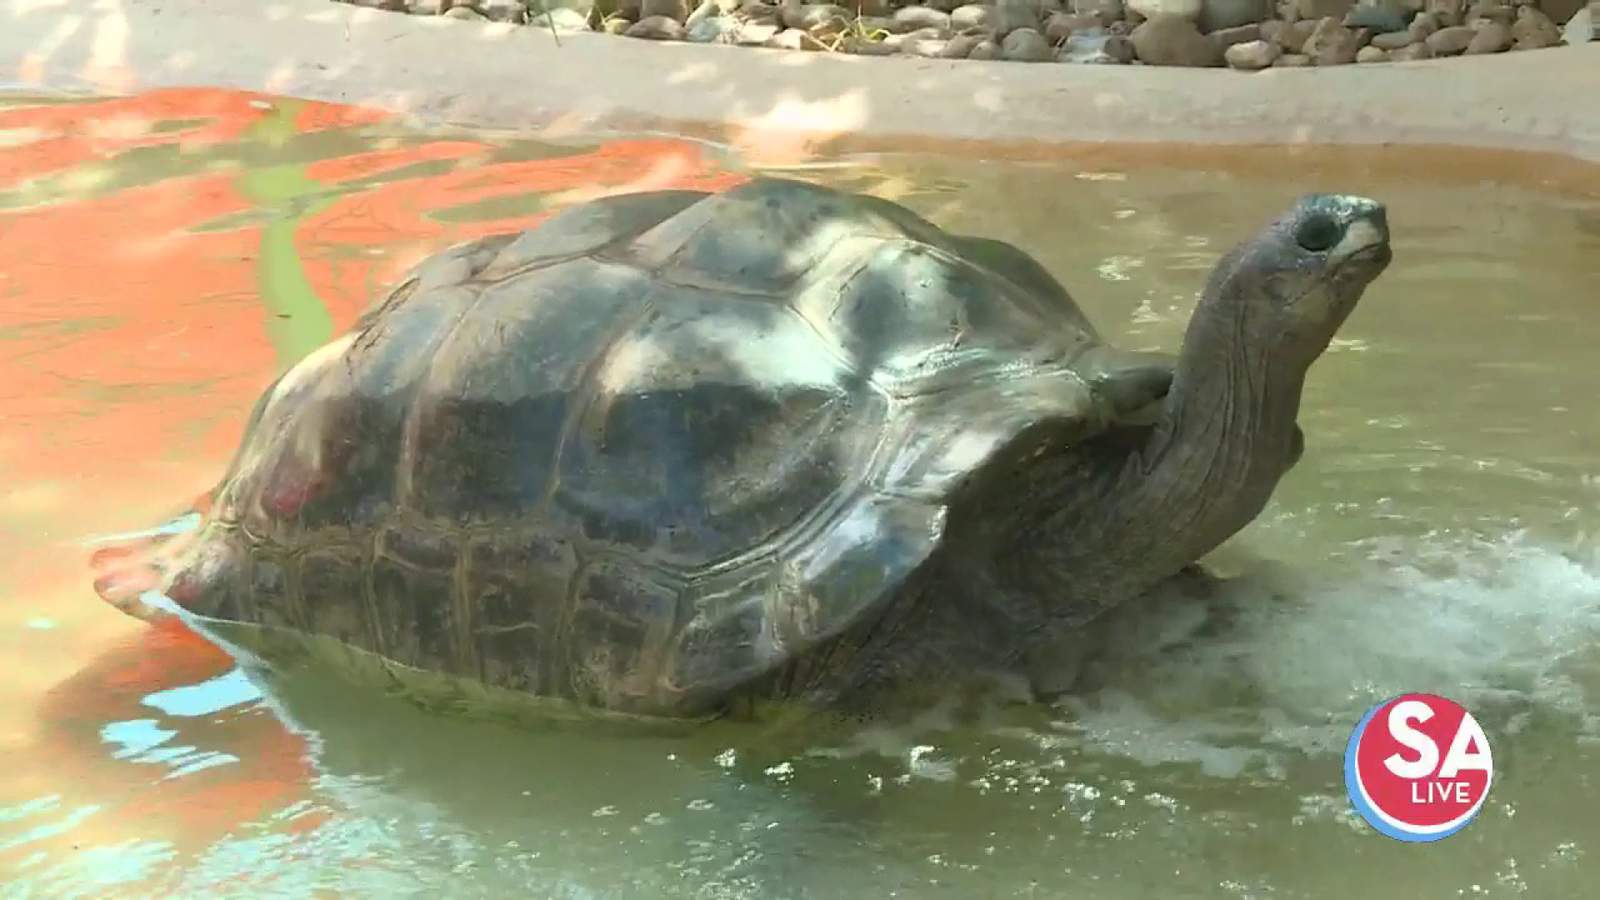 These giant tortoises have a hack to stay cool in the summer heat